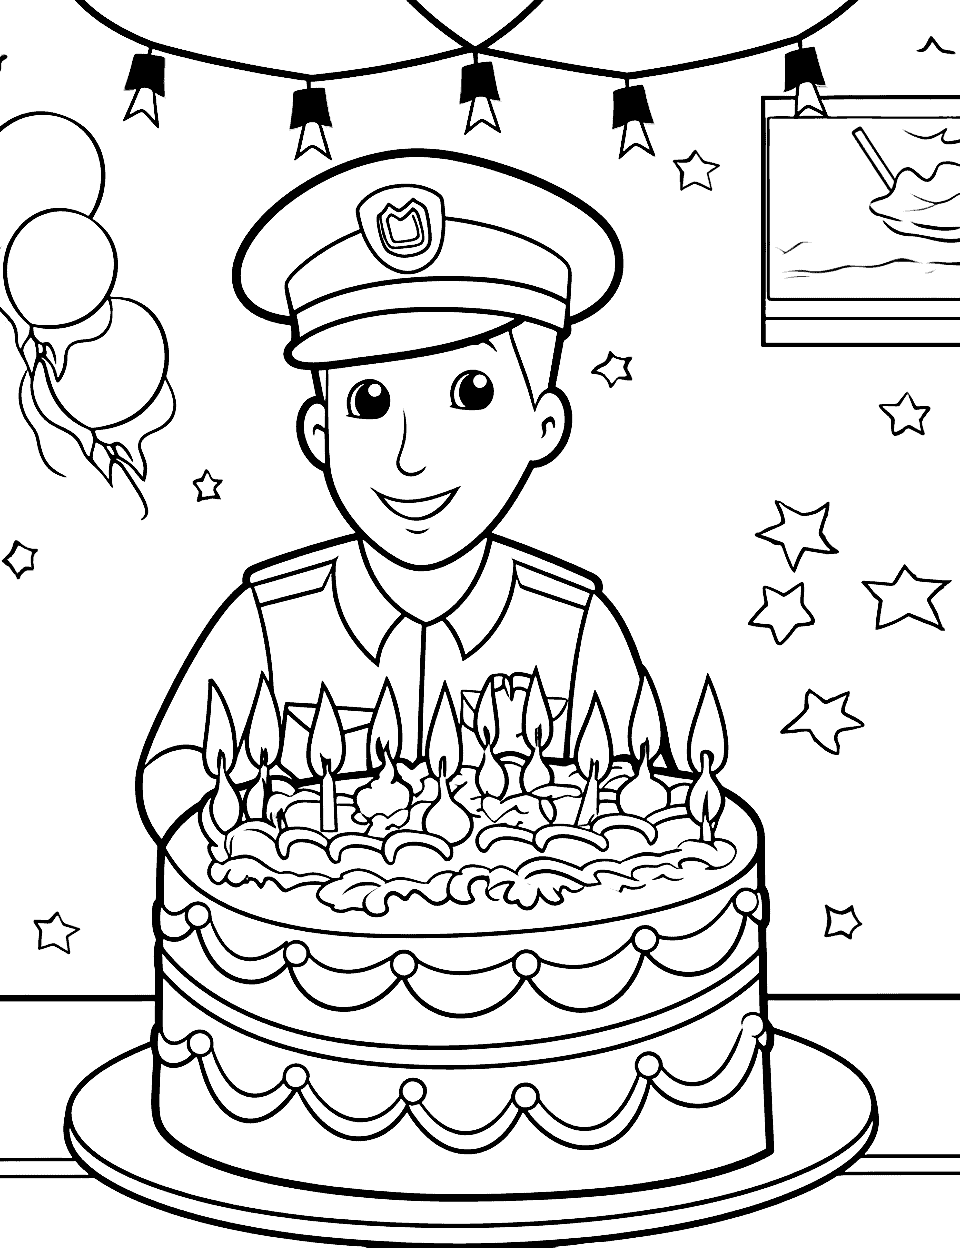 Police Officer's Birthday Patrol Happy Coloring Page - A police officer celebrating his birthday at the police station with a beautiful cake.